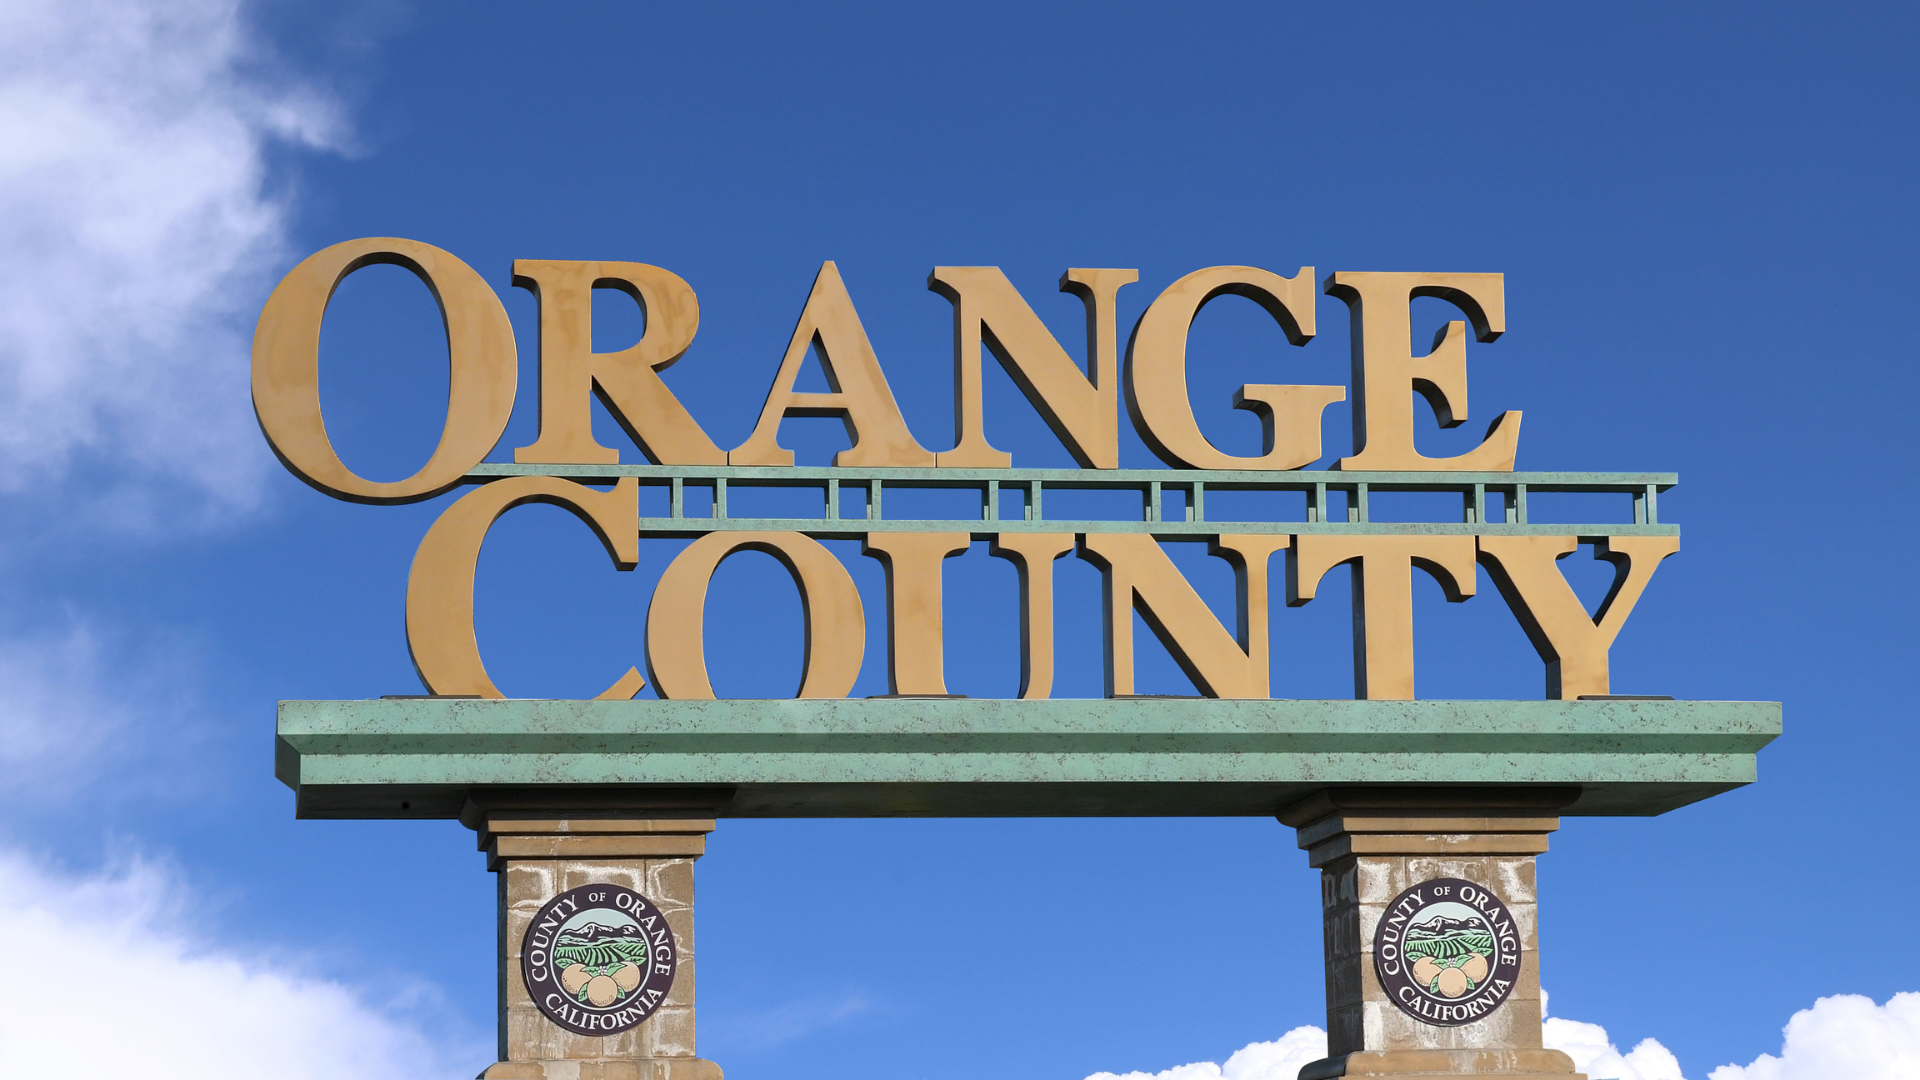 Why-Watching-Orange-County-Should-Be-On-Your-List-of-Things-to-Do-in-Orange-County